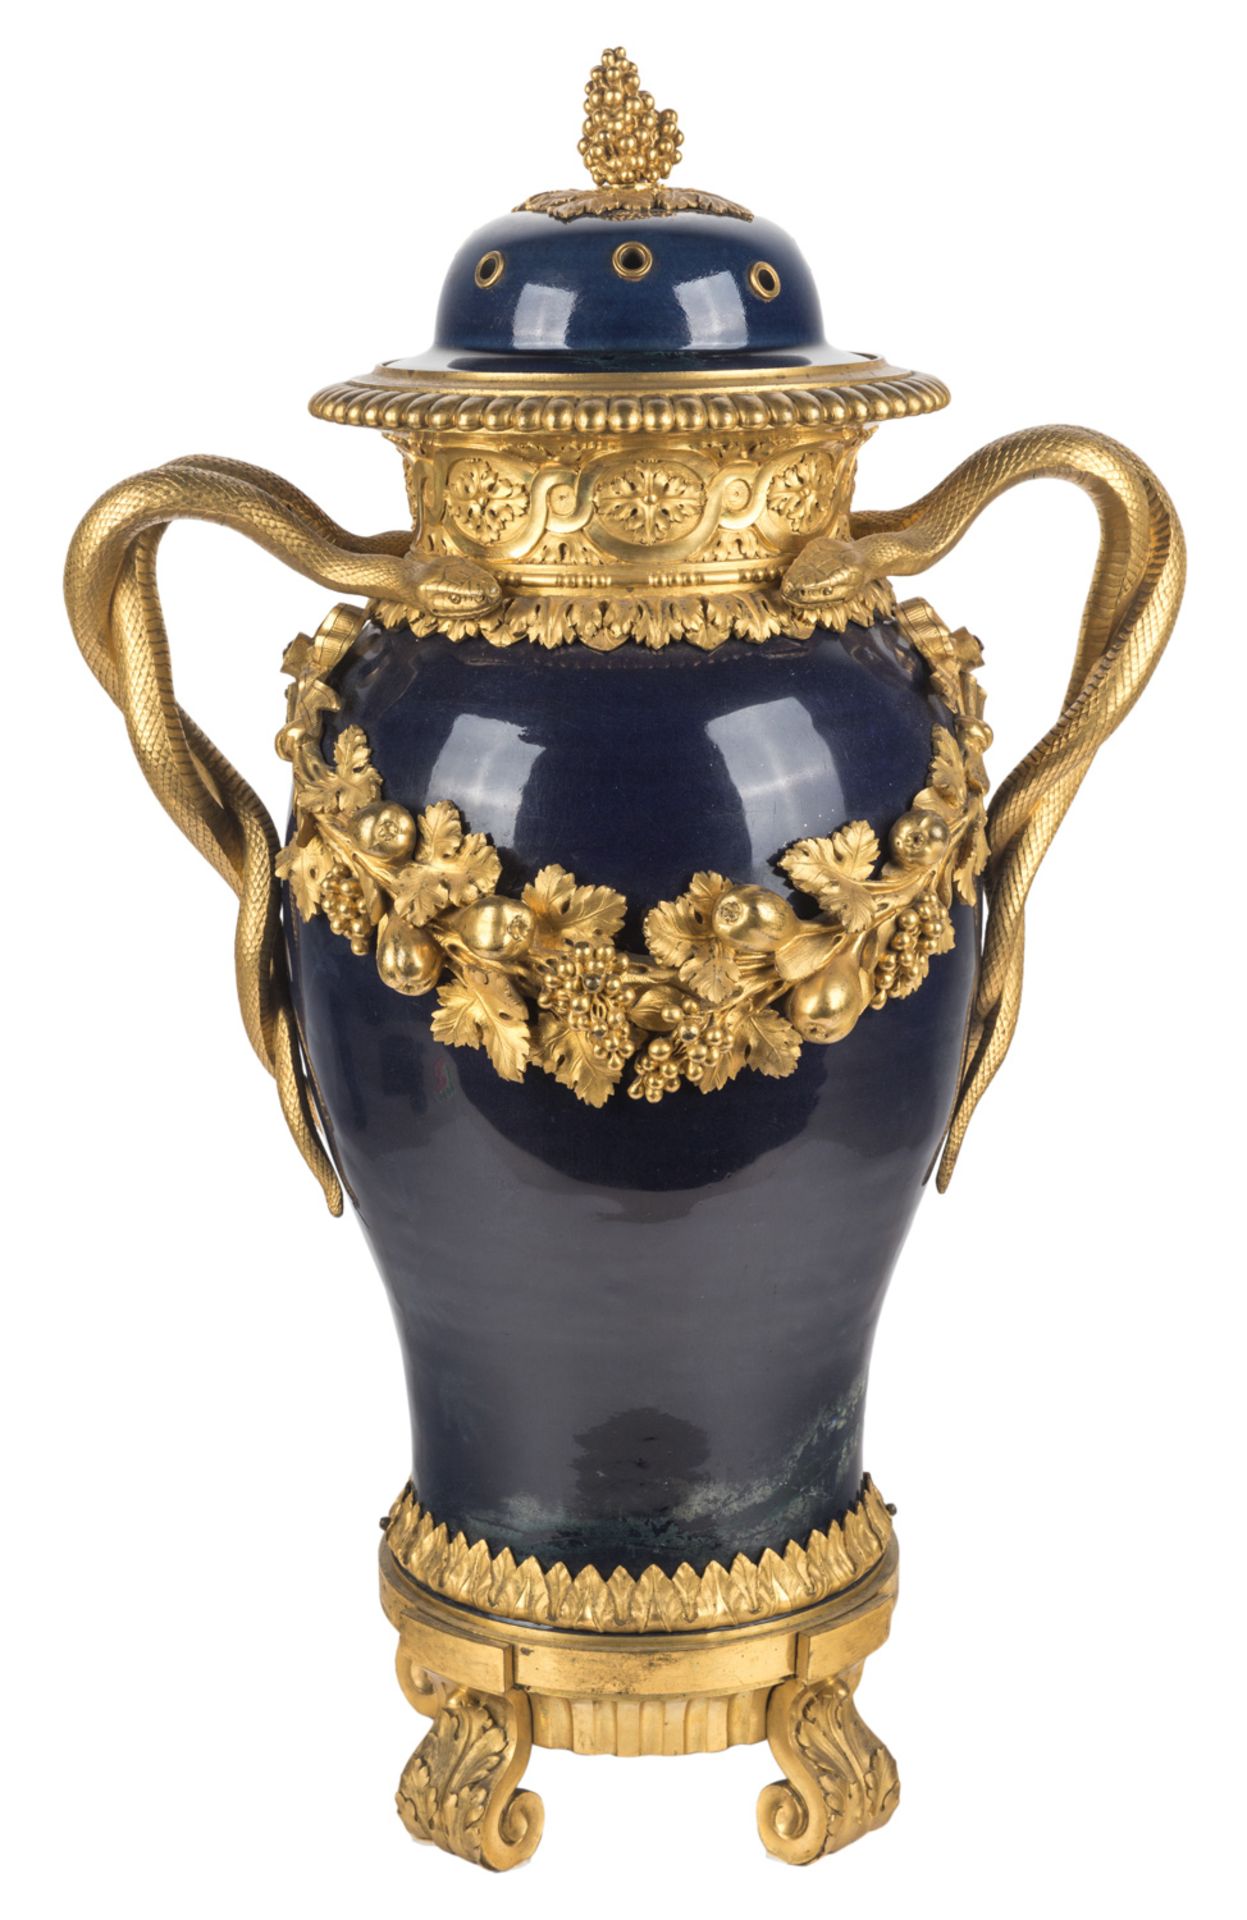 A LOUIS XV/XVI ORMOLU-MOUNTED CHINESE PORCELAIN VASE, WITH LATER SNAKE HANDLES, QIANLONG PERIOD